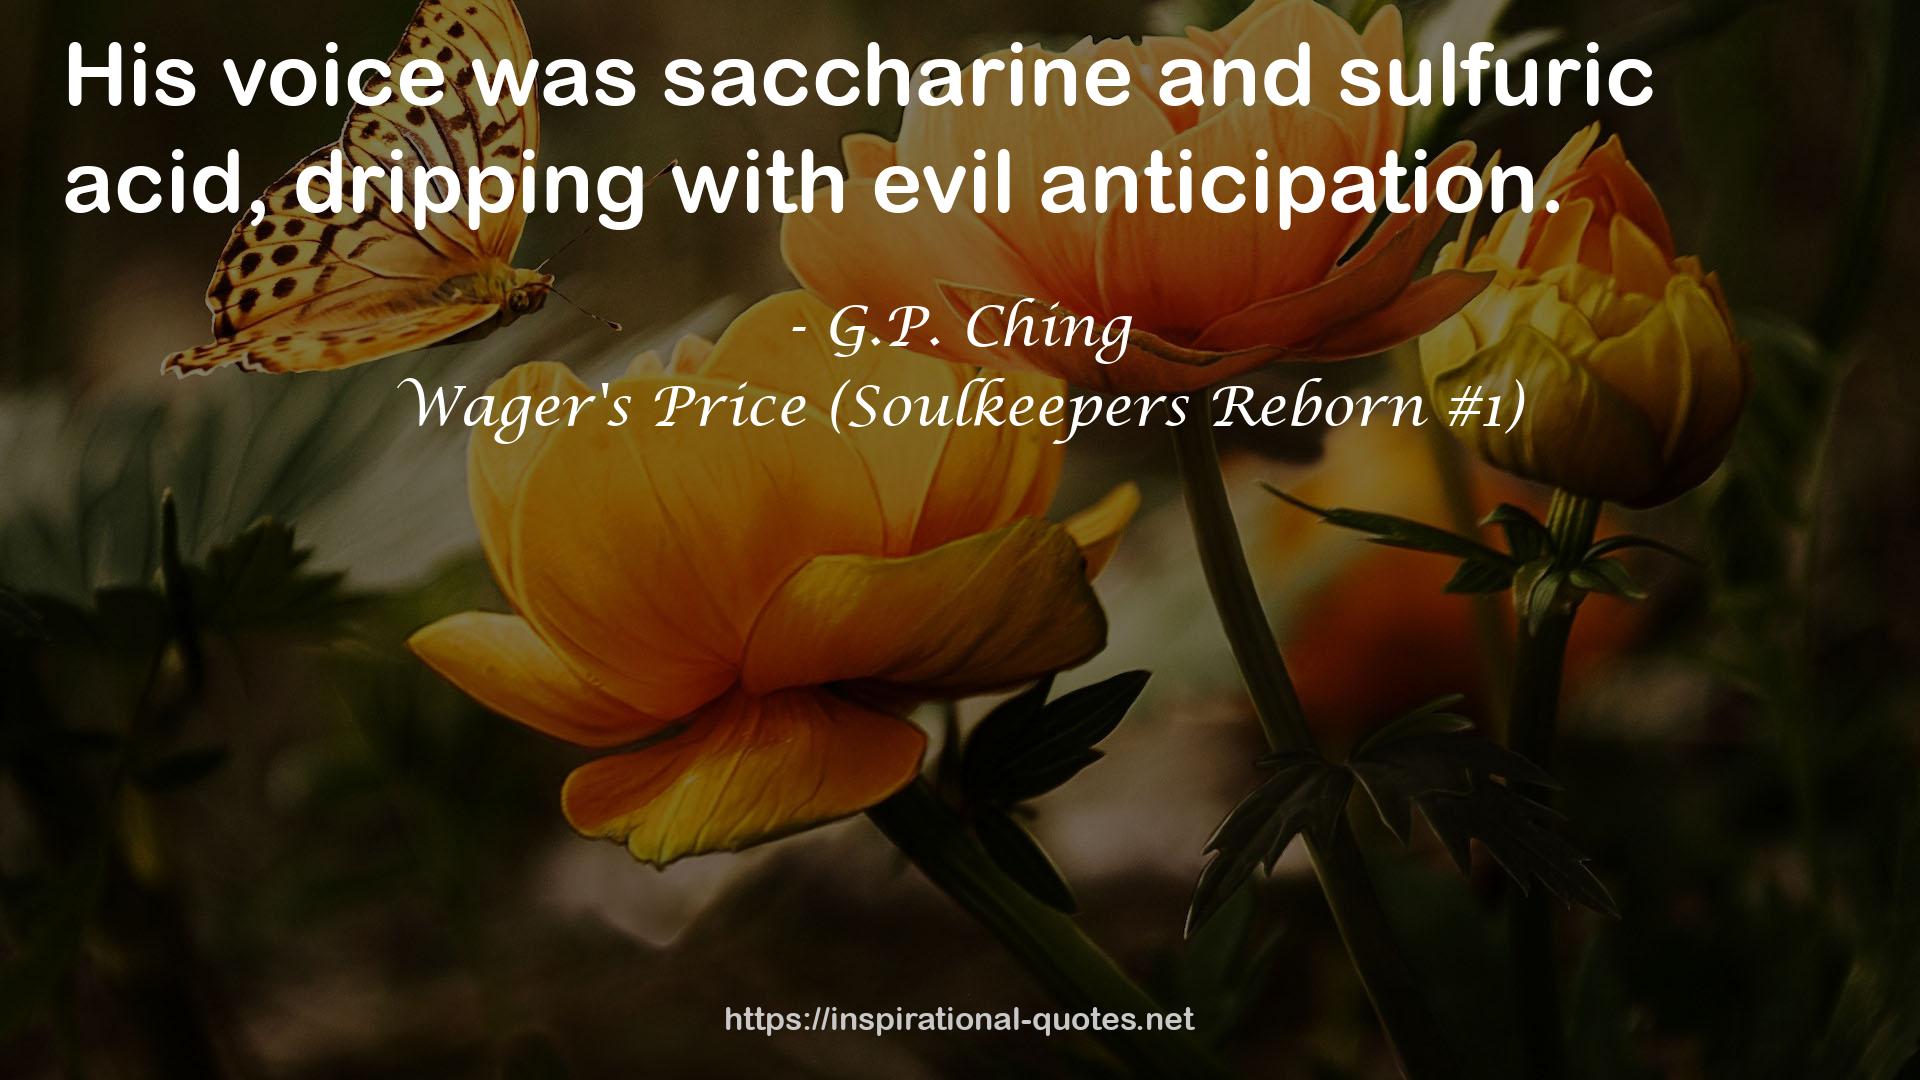 Wager's Price (Soulkeepers Reborn #1) QUOTES